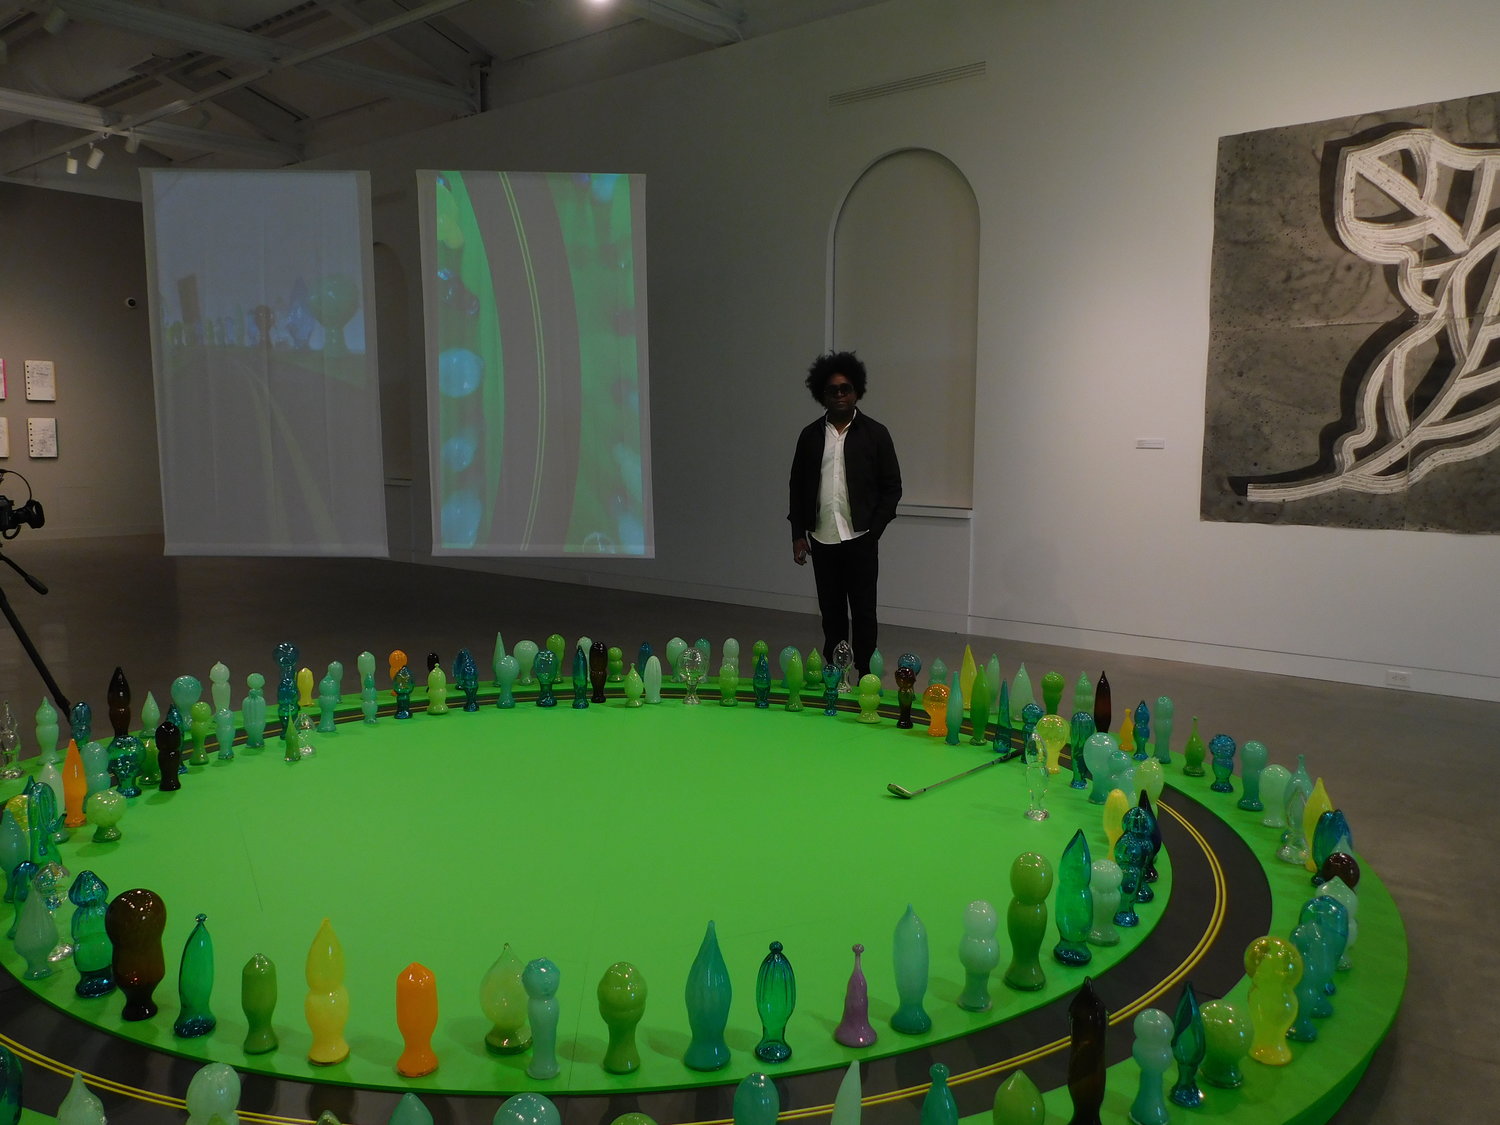 “Landscape and Hierarchies” by Alexandre Arrechea is an installation of a circular putting green inlaid with a track for a golf ball amid a forest of glass-blown sculptures of trees. The piece is flanked by video projections that offer alternative views of the imagined
landscape.